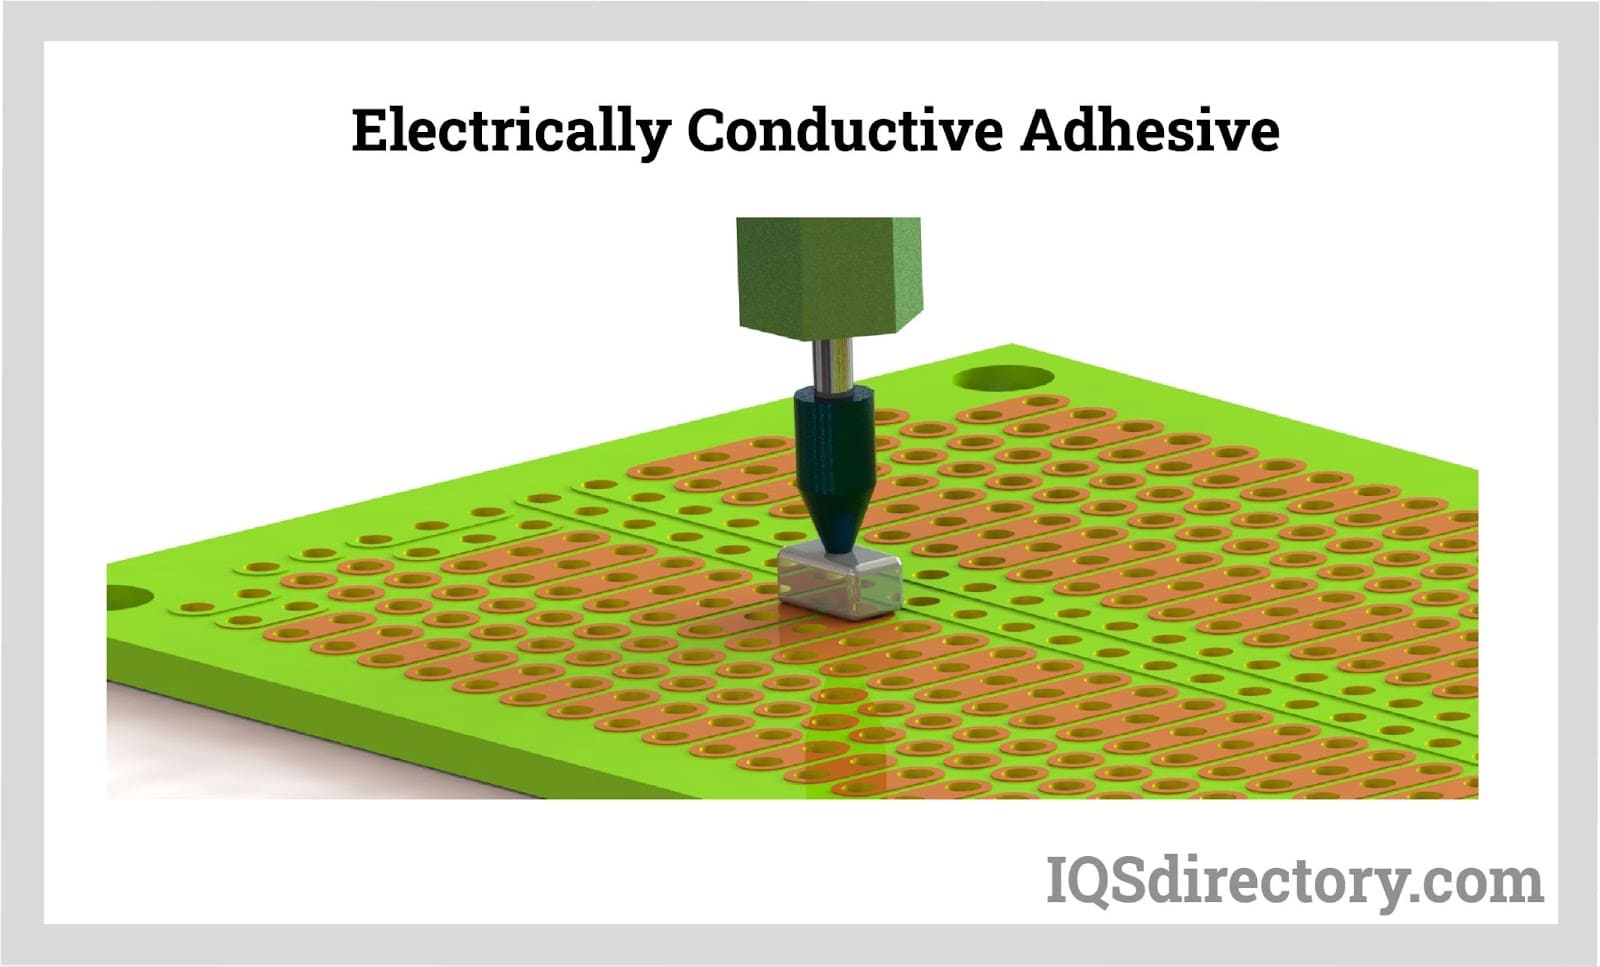 Adhesives with Electrical Conductivity